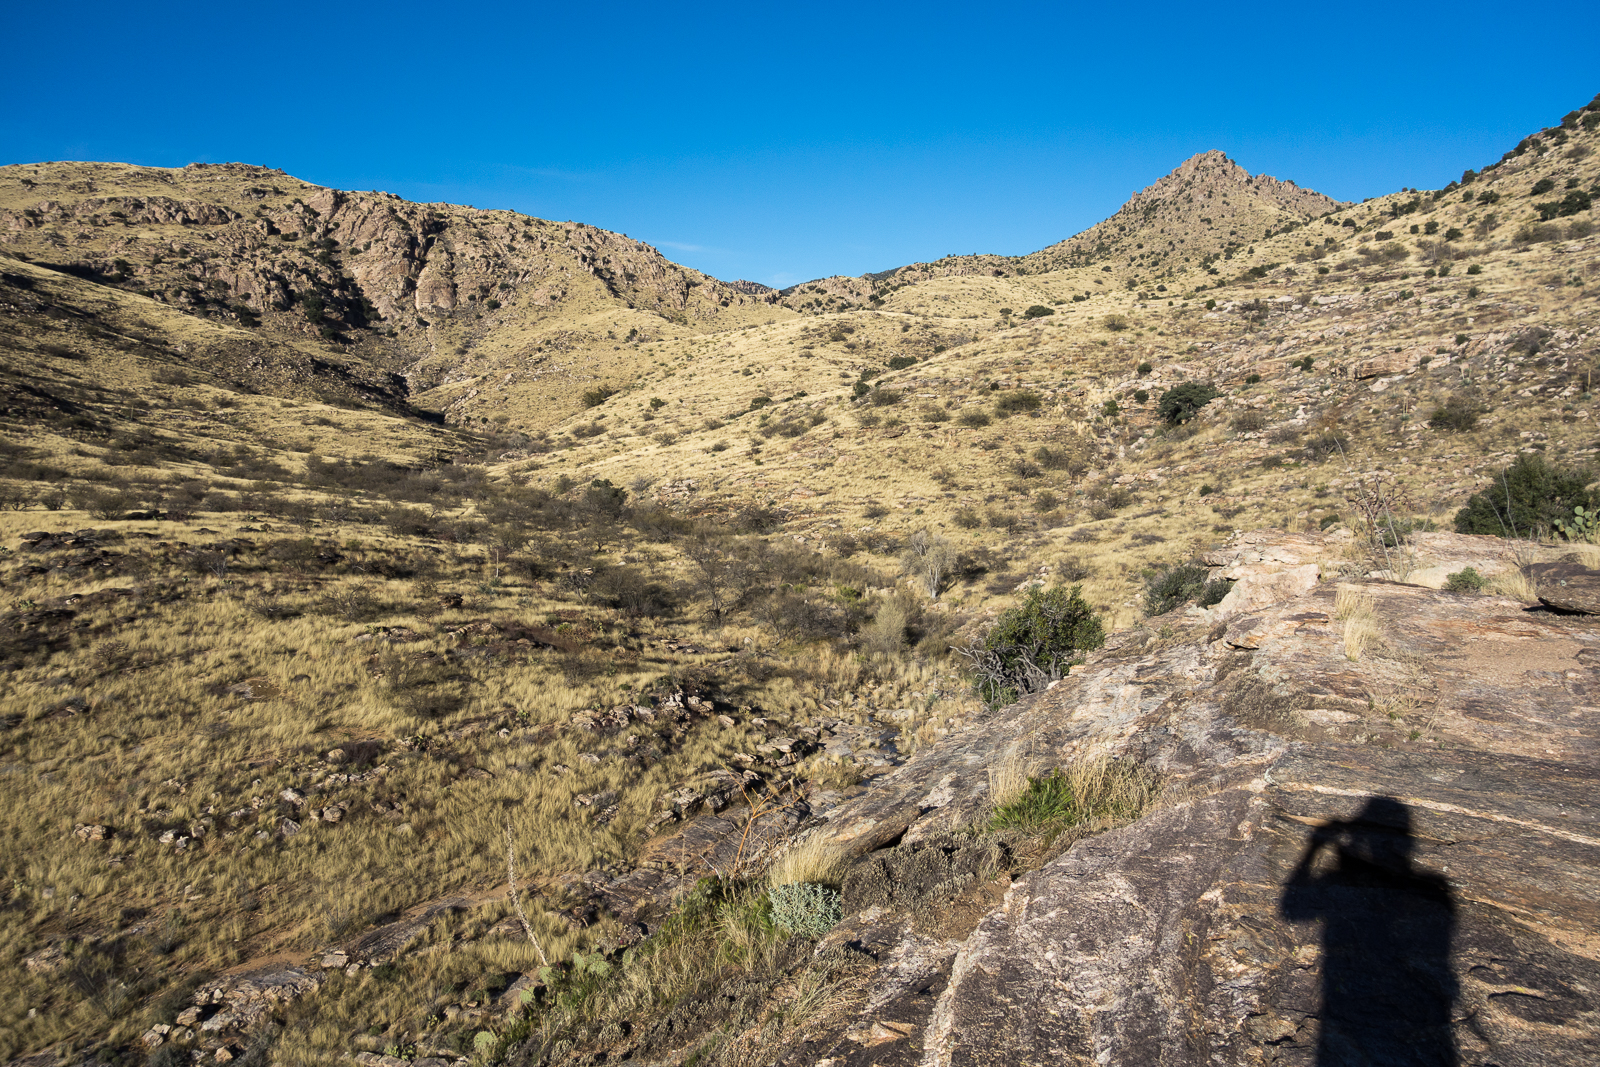 Grassy hillsides above Soldier Canyon on the Soldier Trail. February 2016.